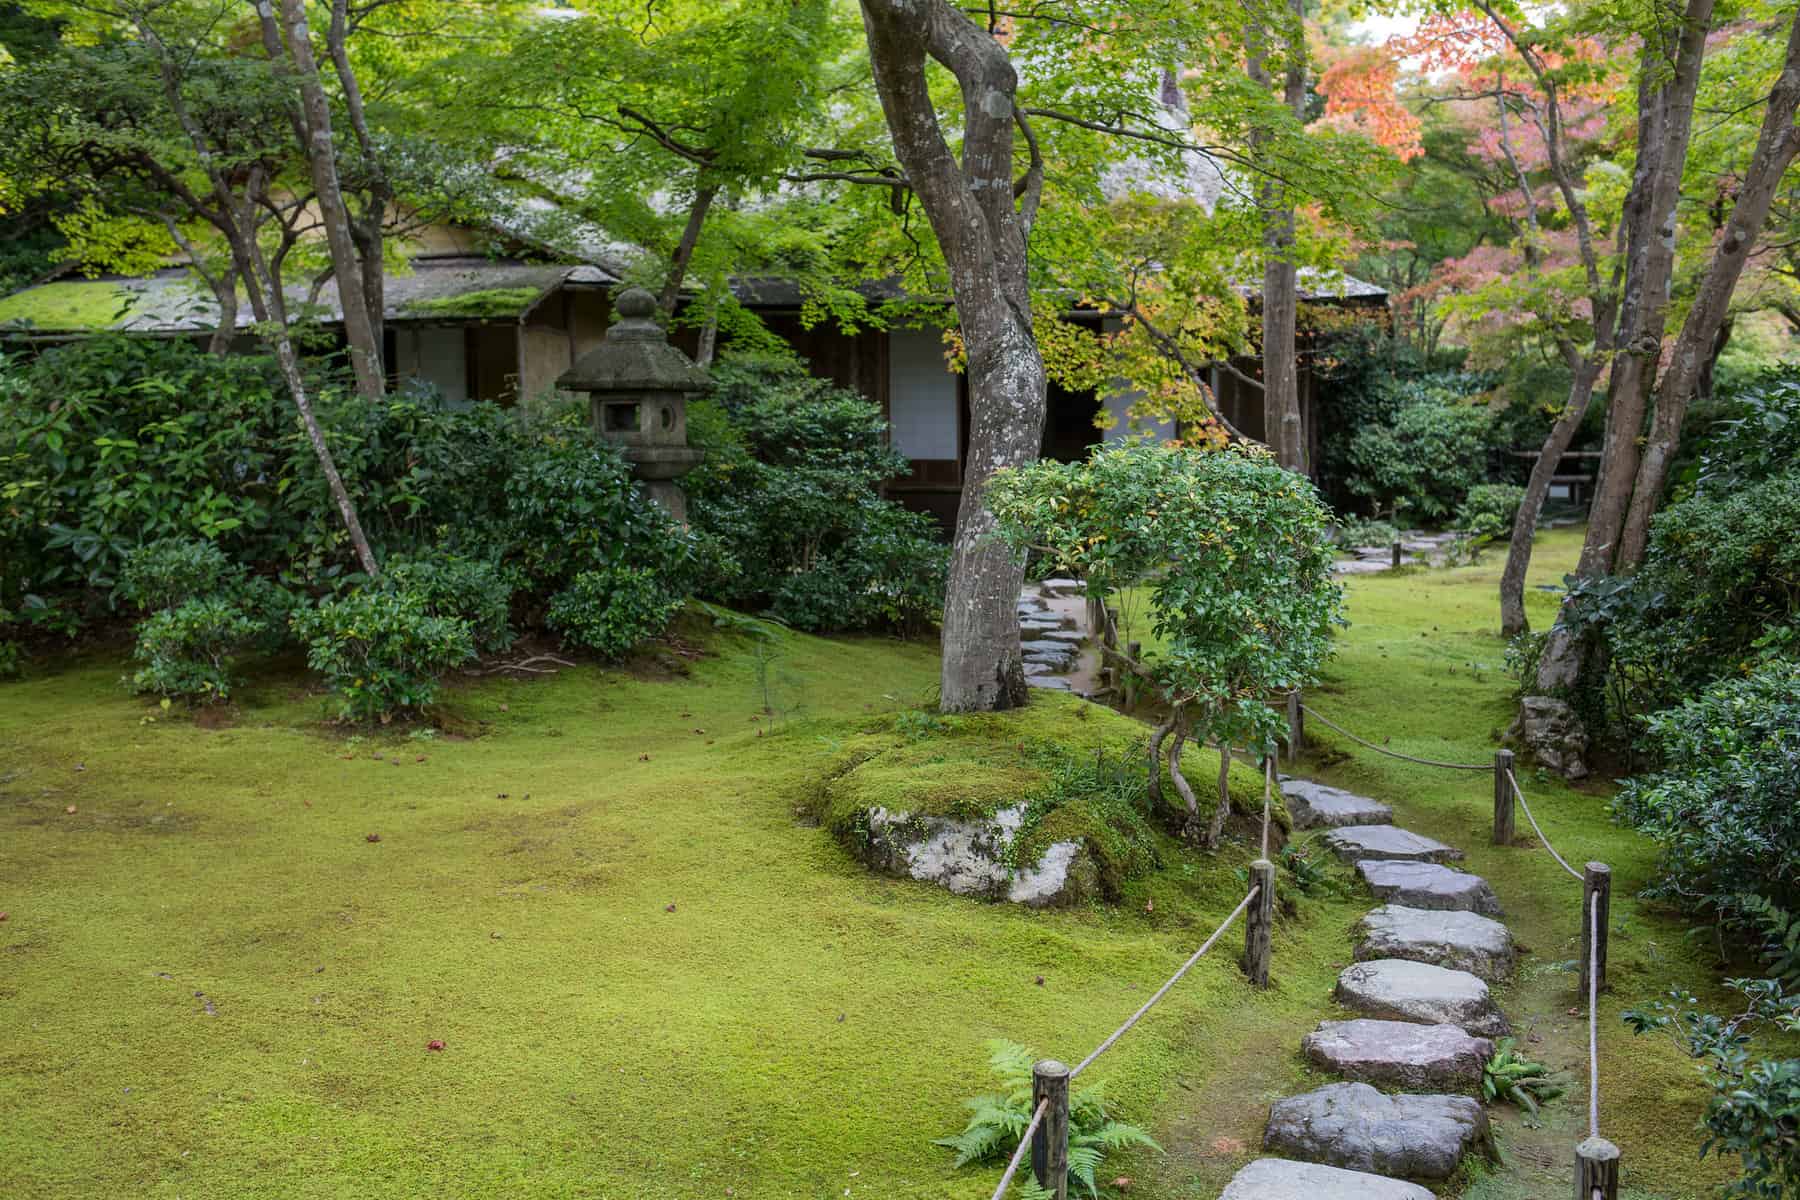 Explore the enchanting beauty of the Japanese garden in Kyoto, with its serene moss lawn and traditional elements. tranquility and elegance in this Japanese garden